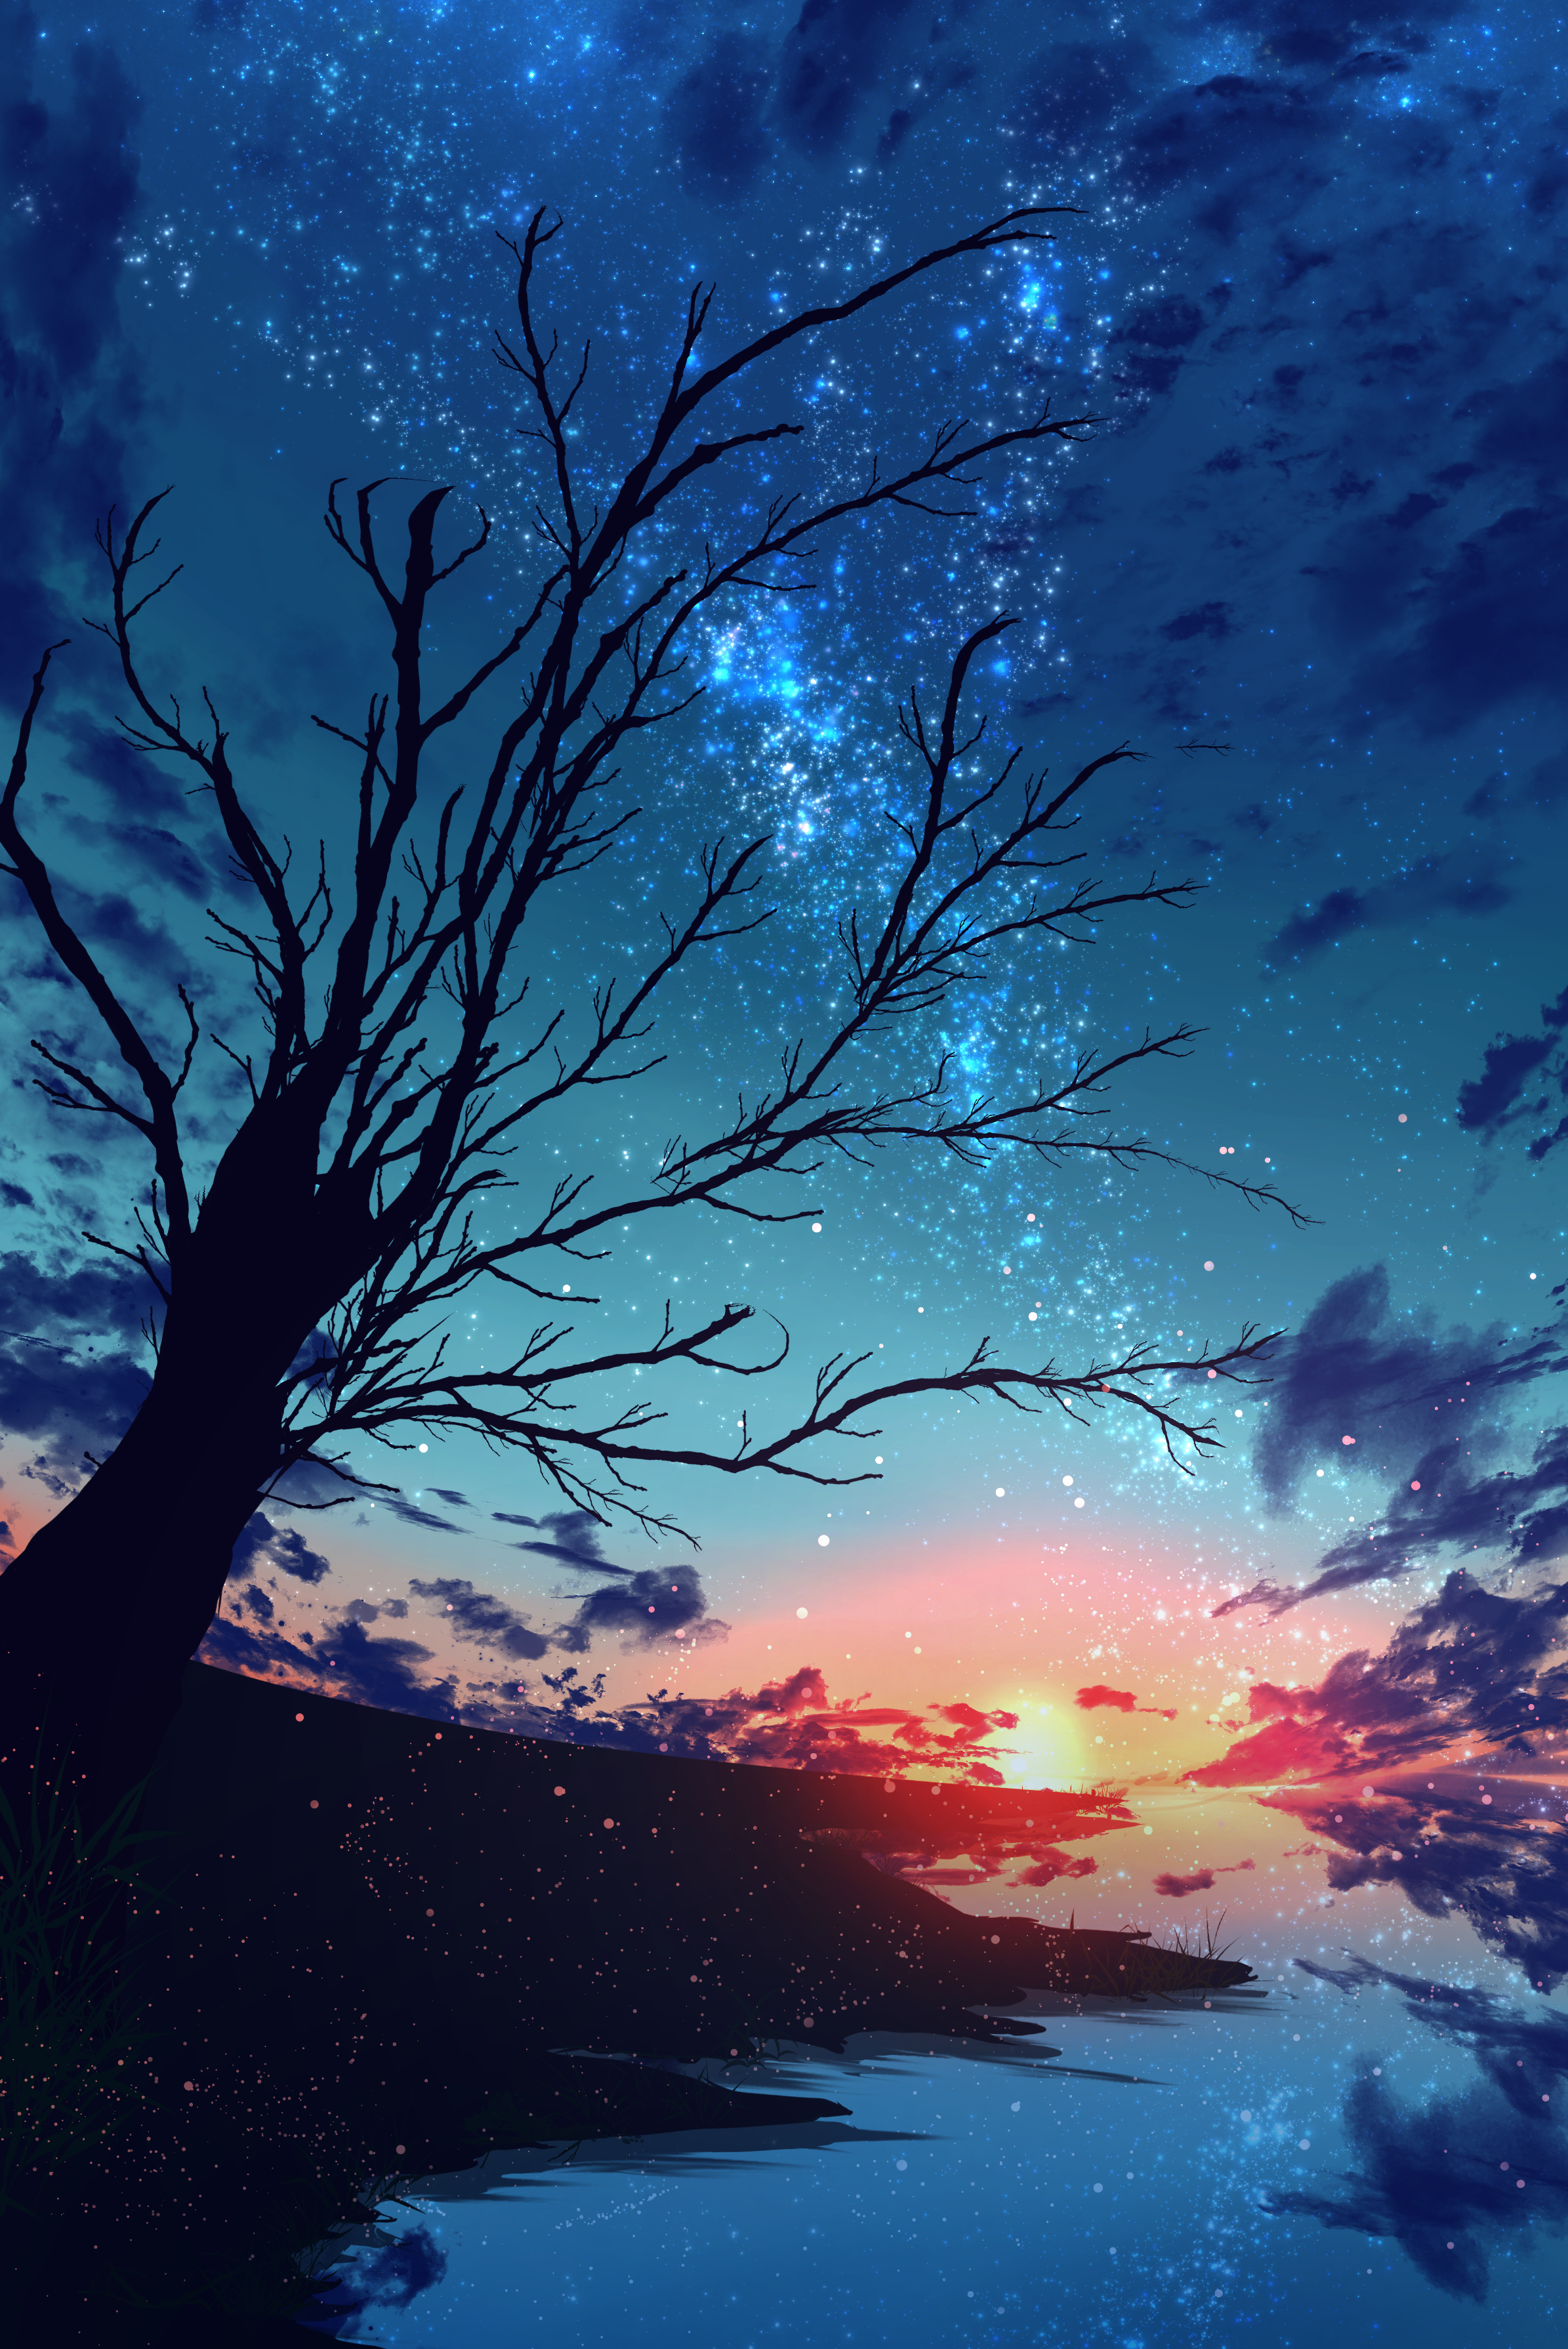 Cool Wallpapers sunset, nebula, art, stars, wood, tree, branches, particles